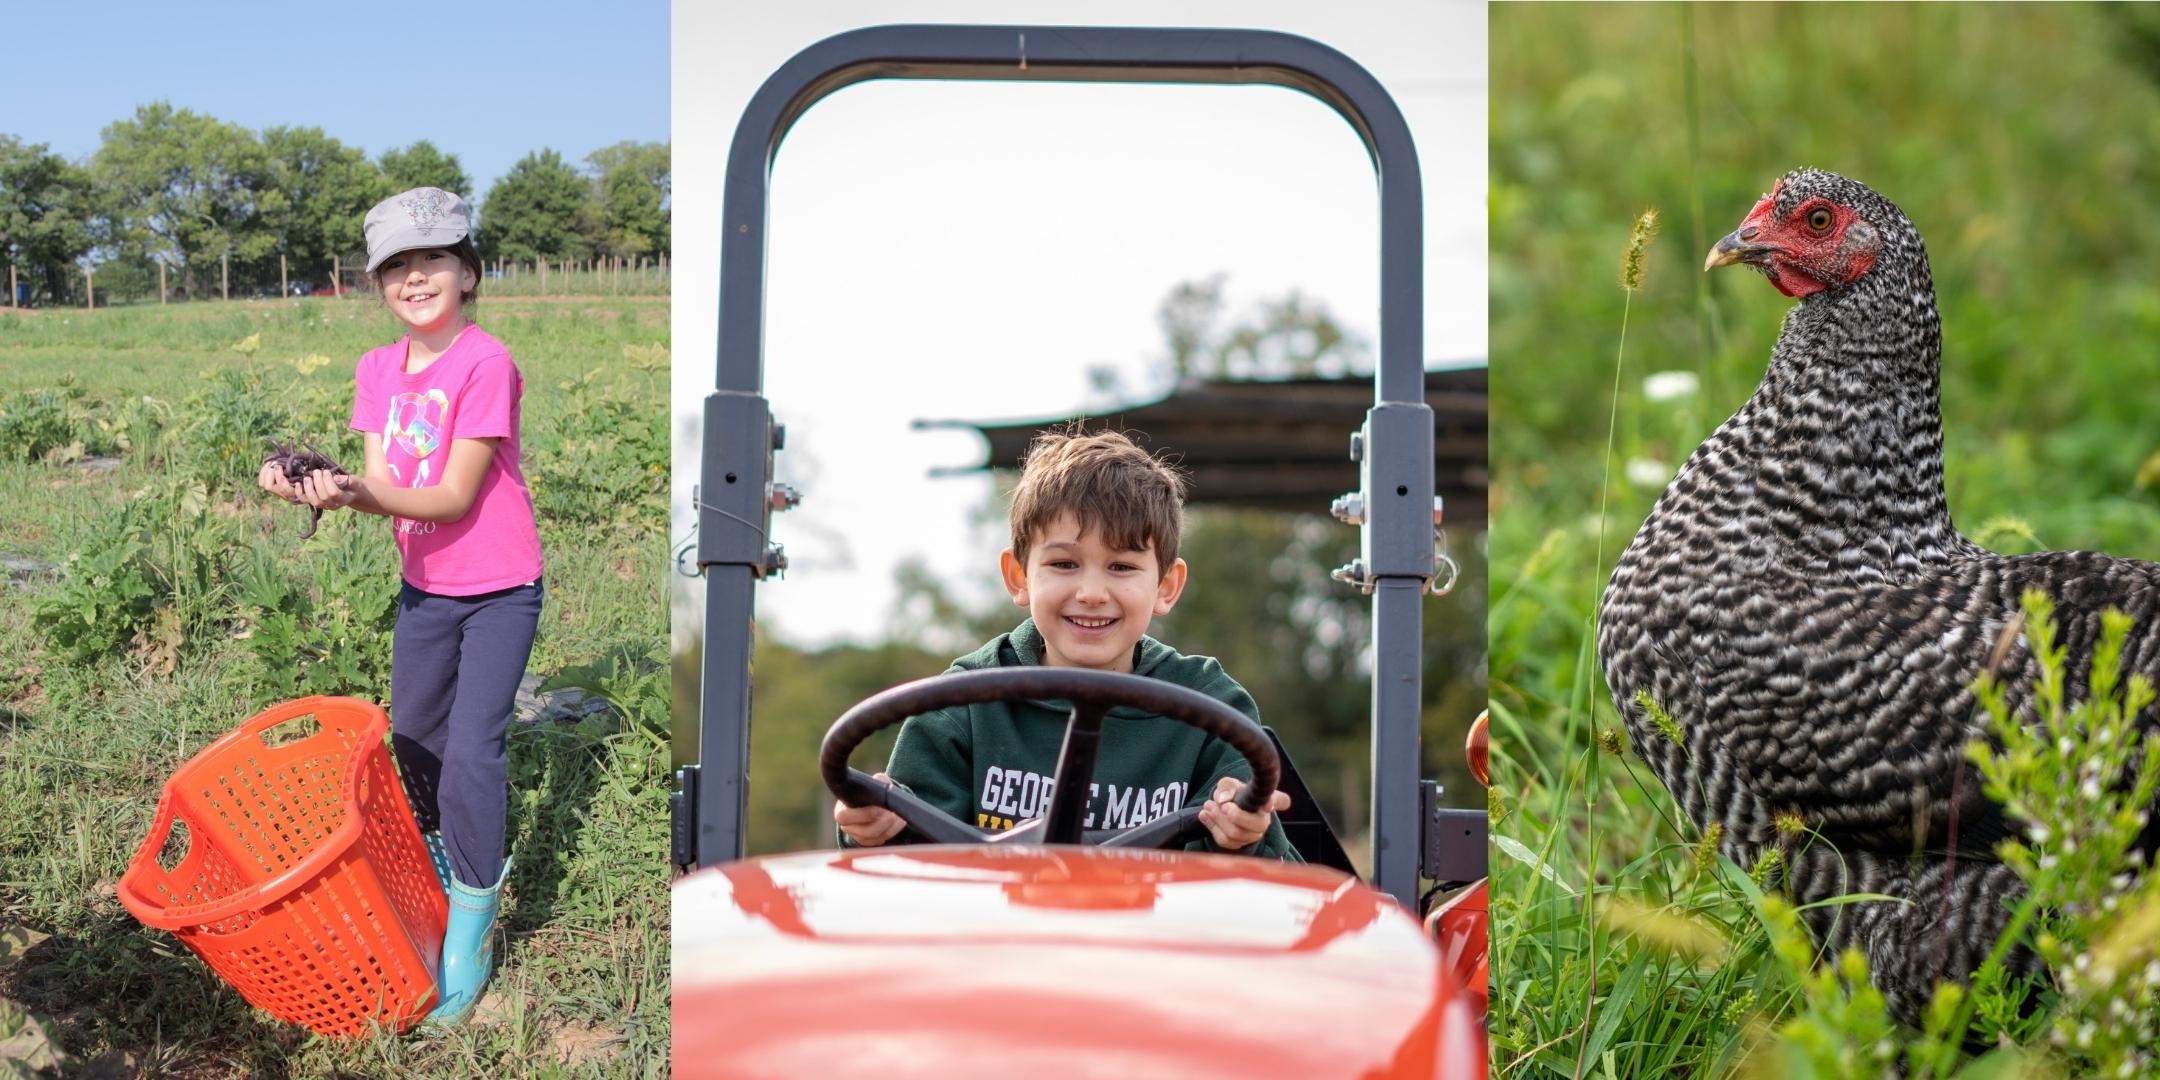 Left to right: young girl holding freshly picked produce in a field, a young boy sitting at the steering wheel of a red tractor, a black and white chicken